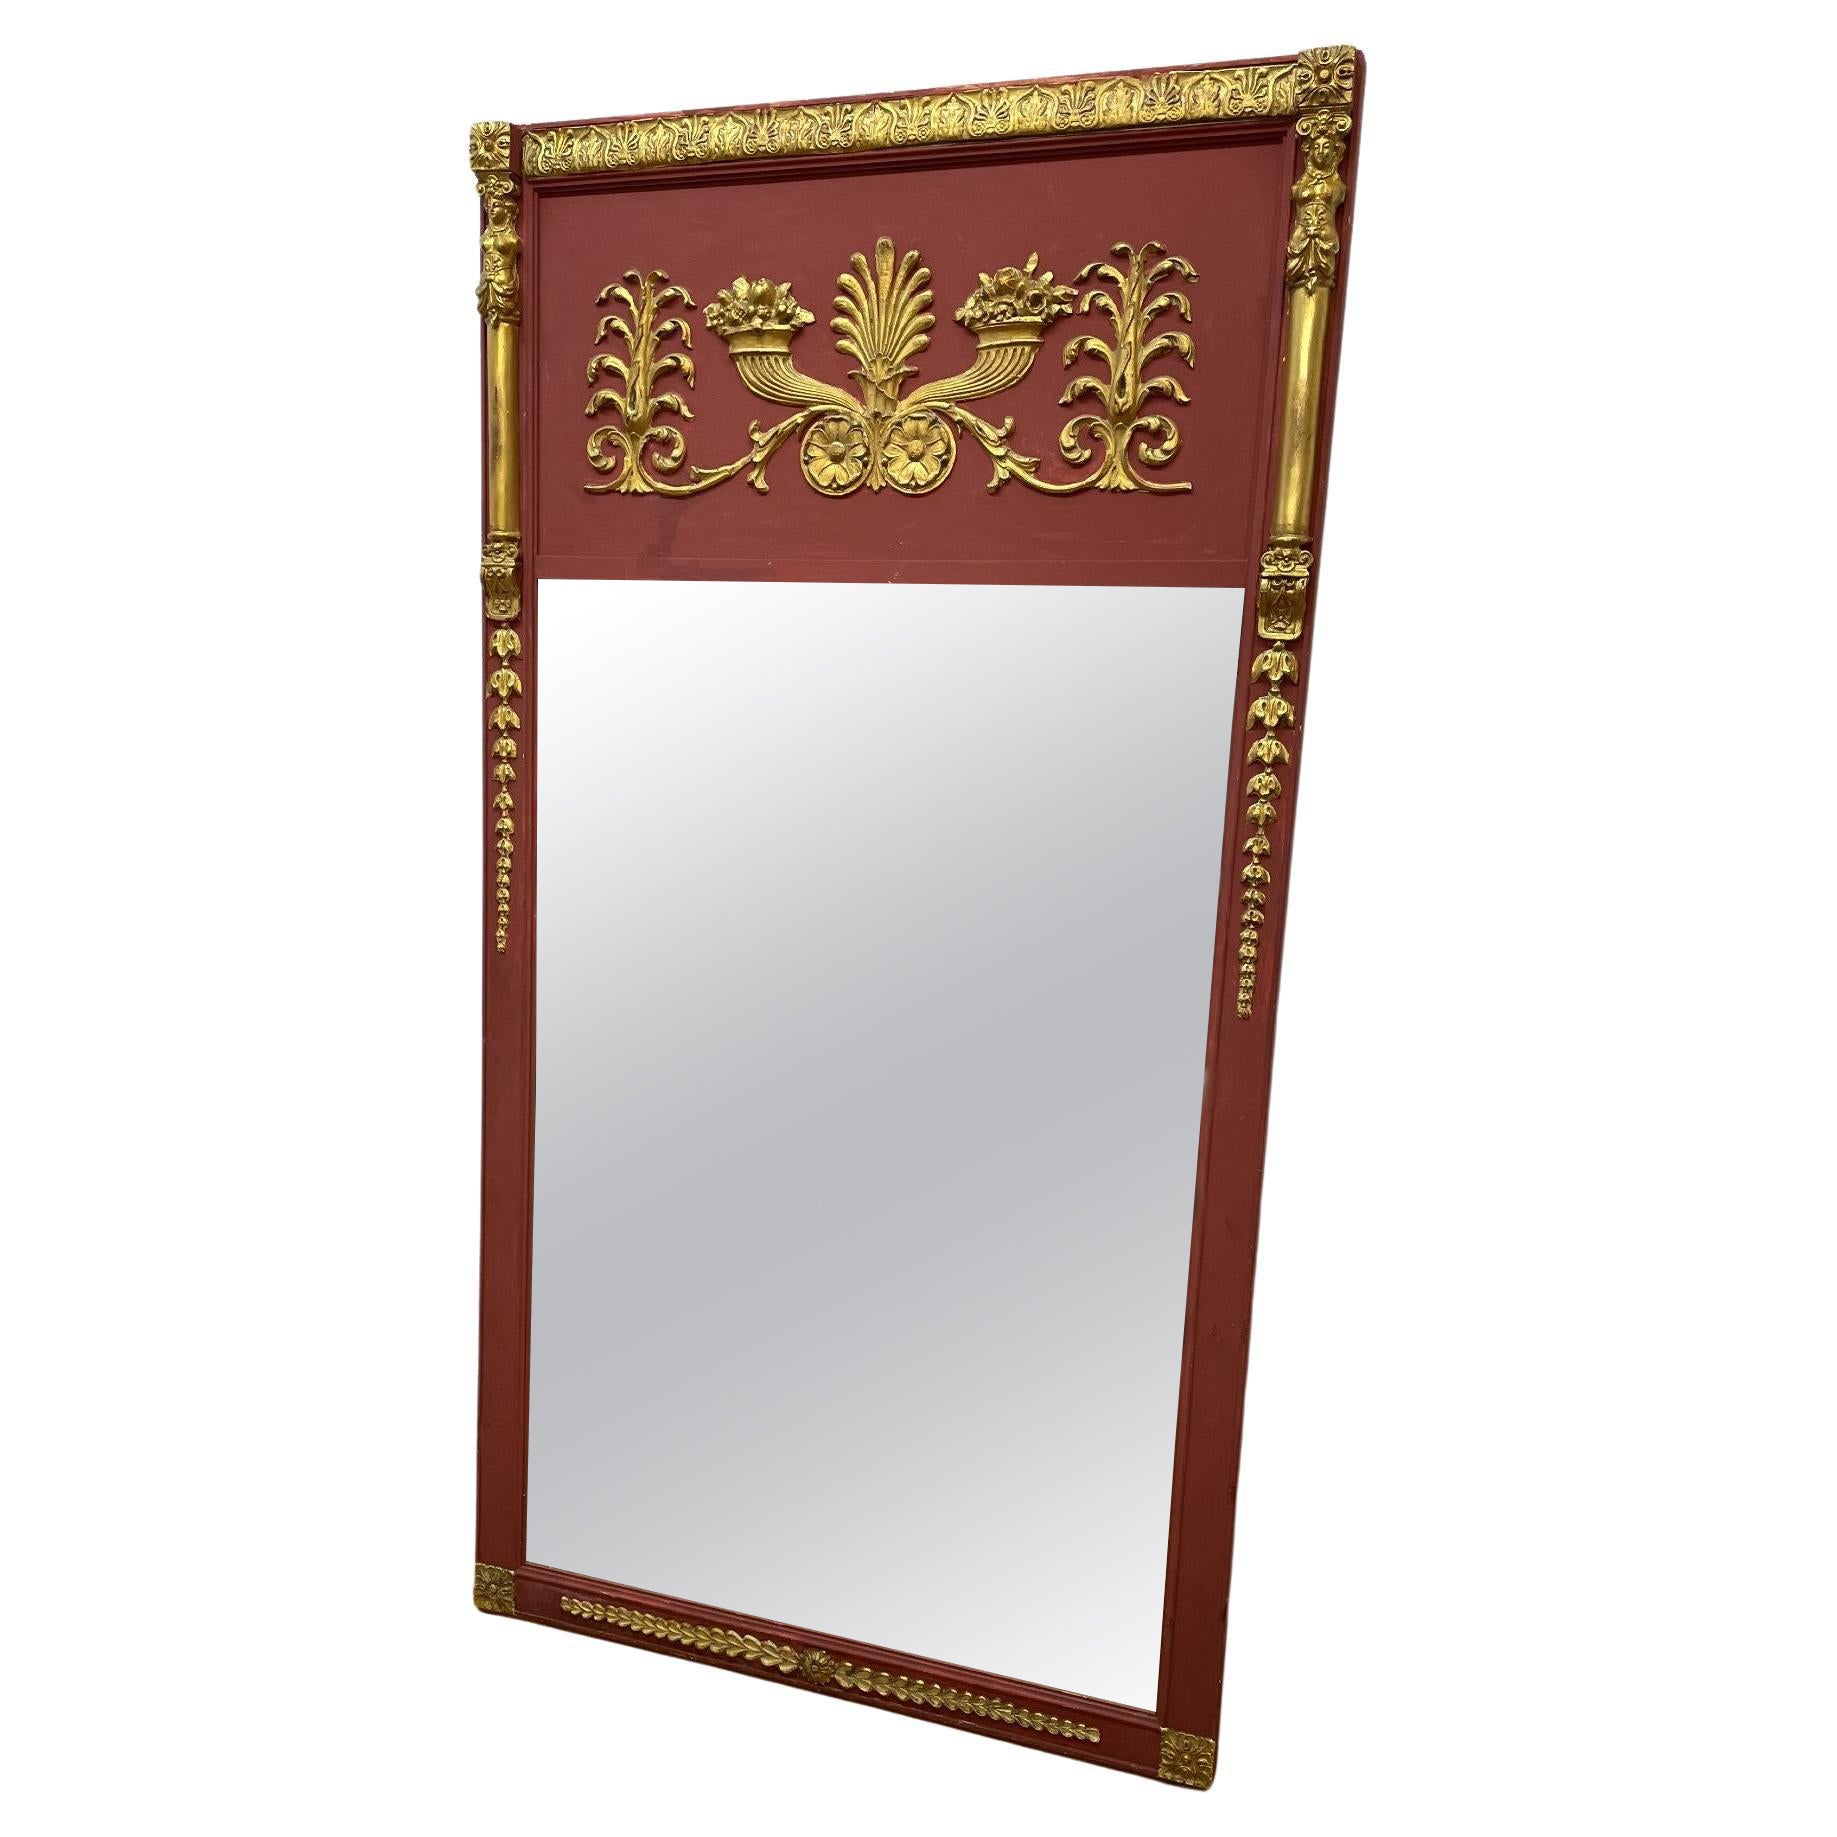 Neo-Classical Gilded and Red Painted Mirror With Cornucopia Design For Sale